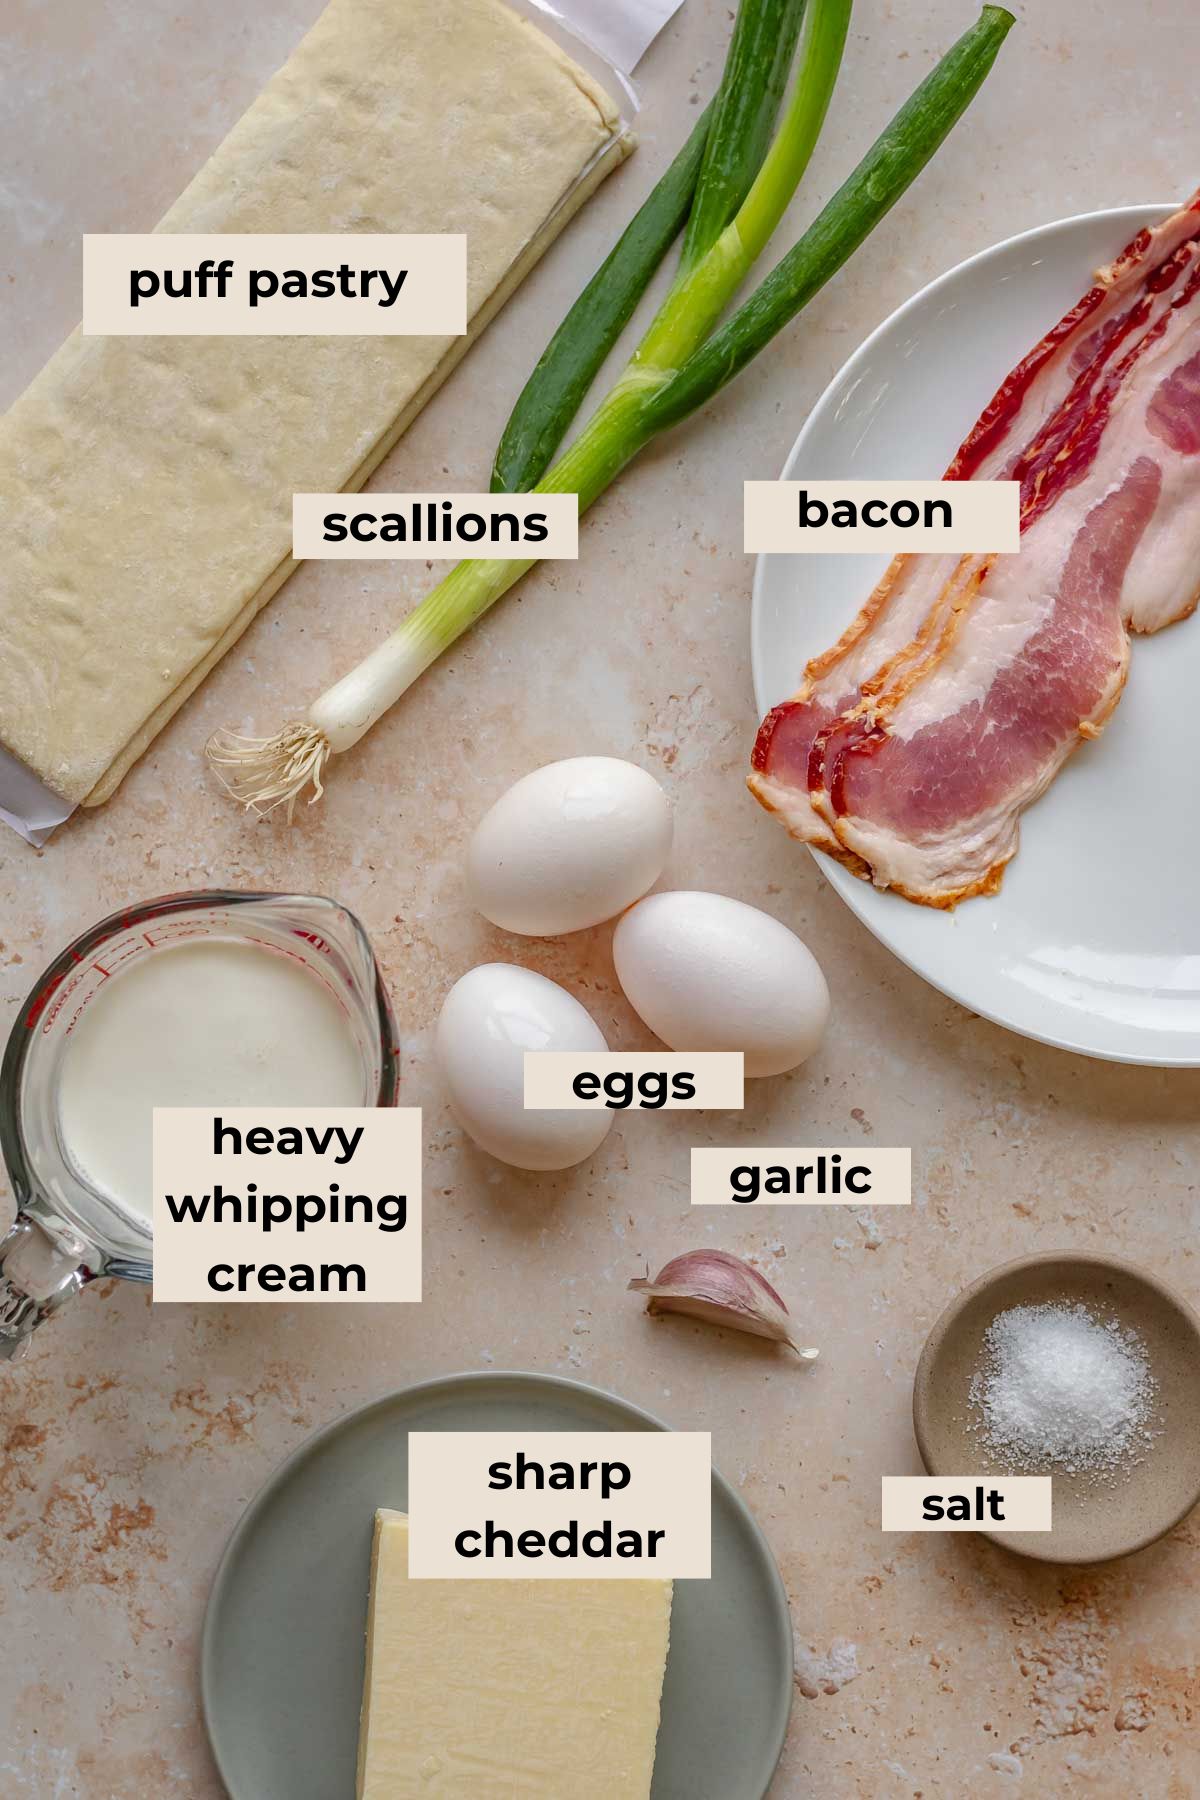 Ingredients for puff pastry mini quiche.